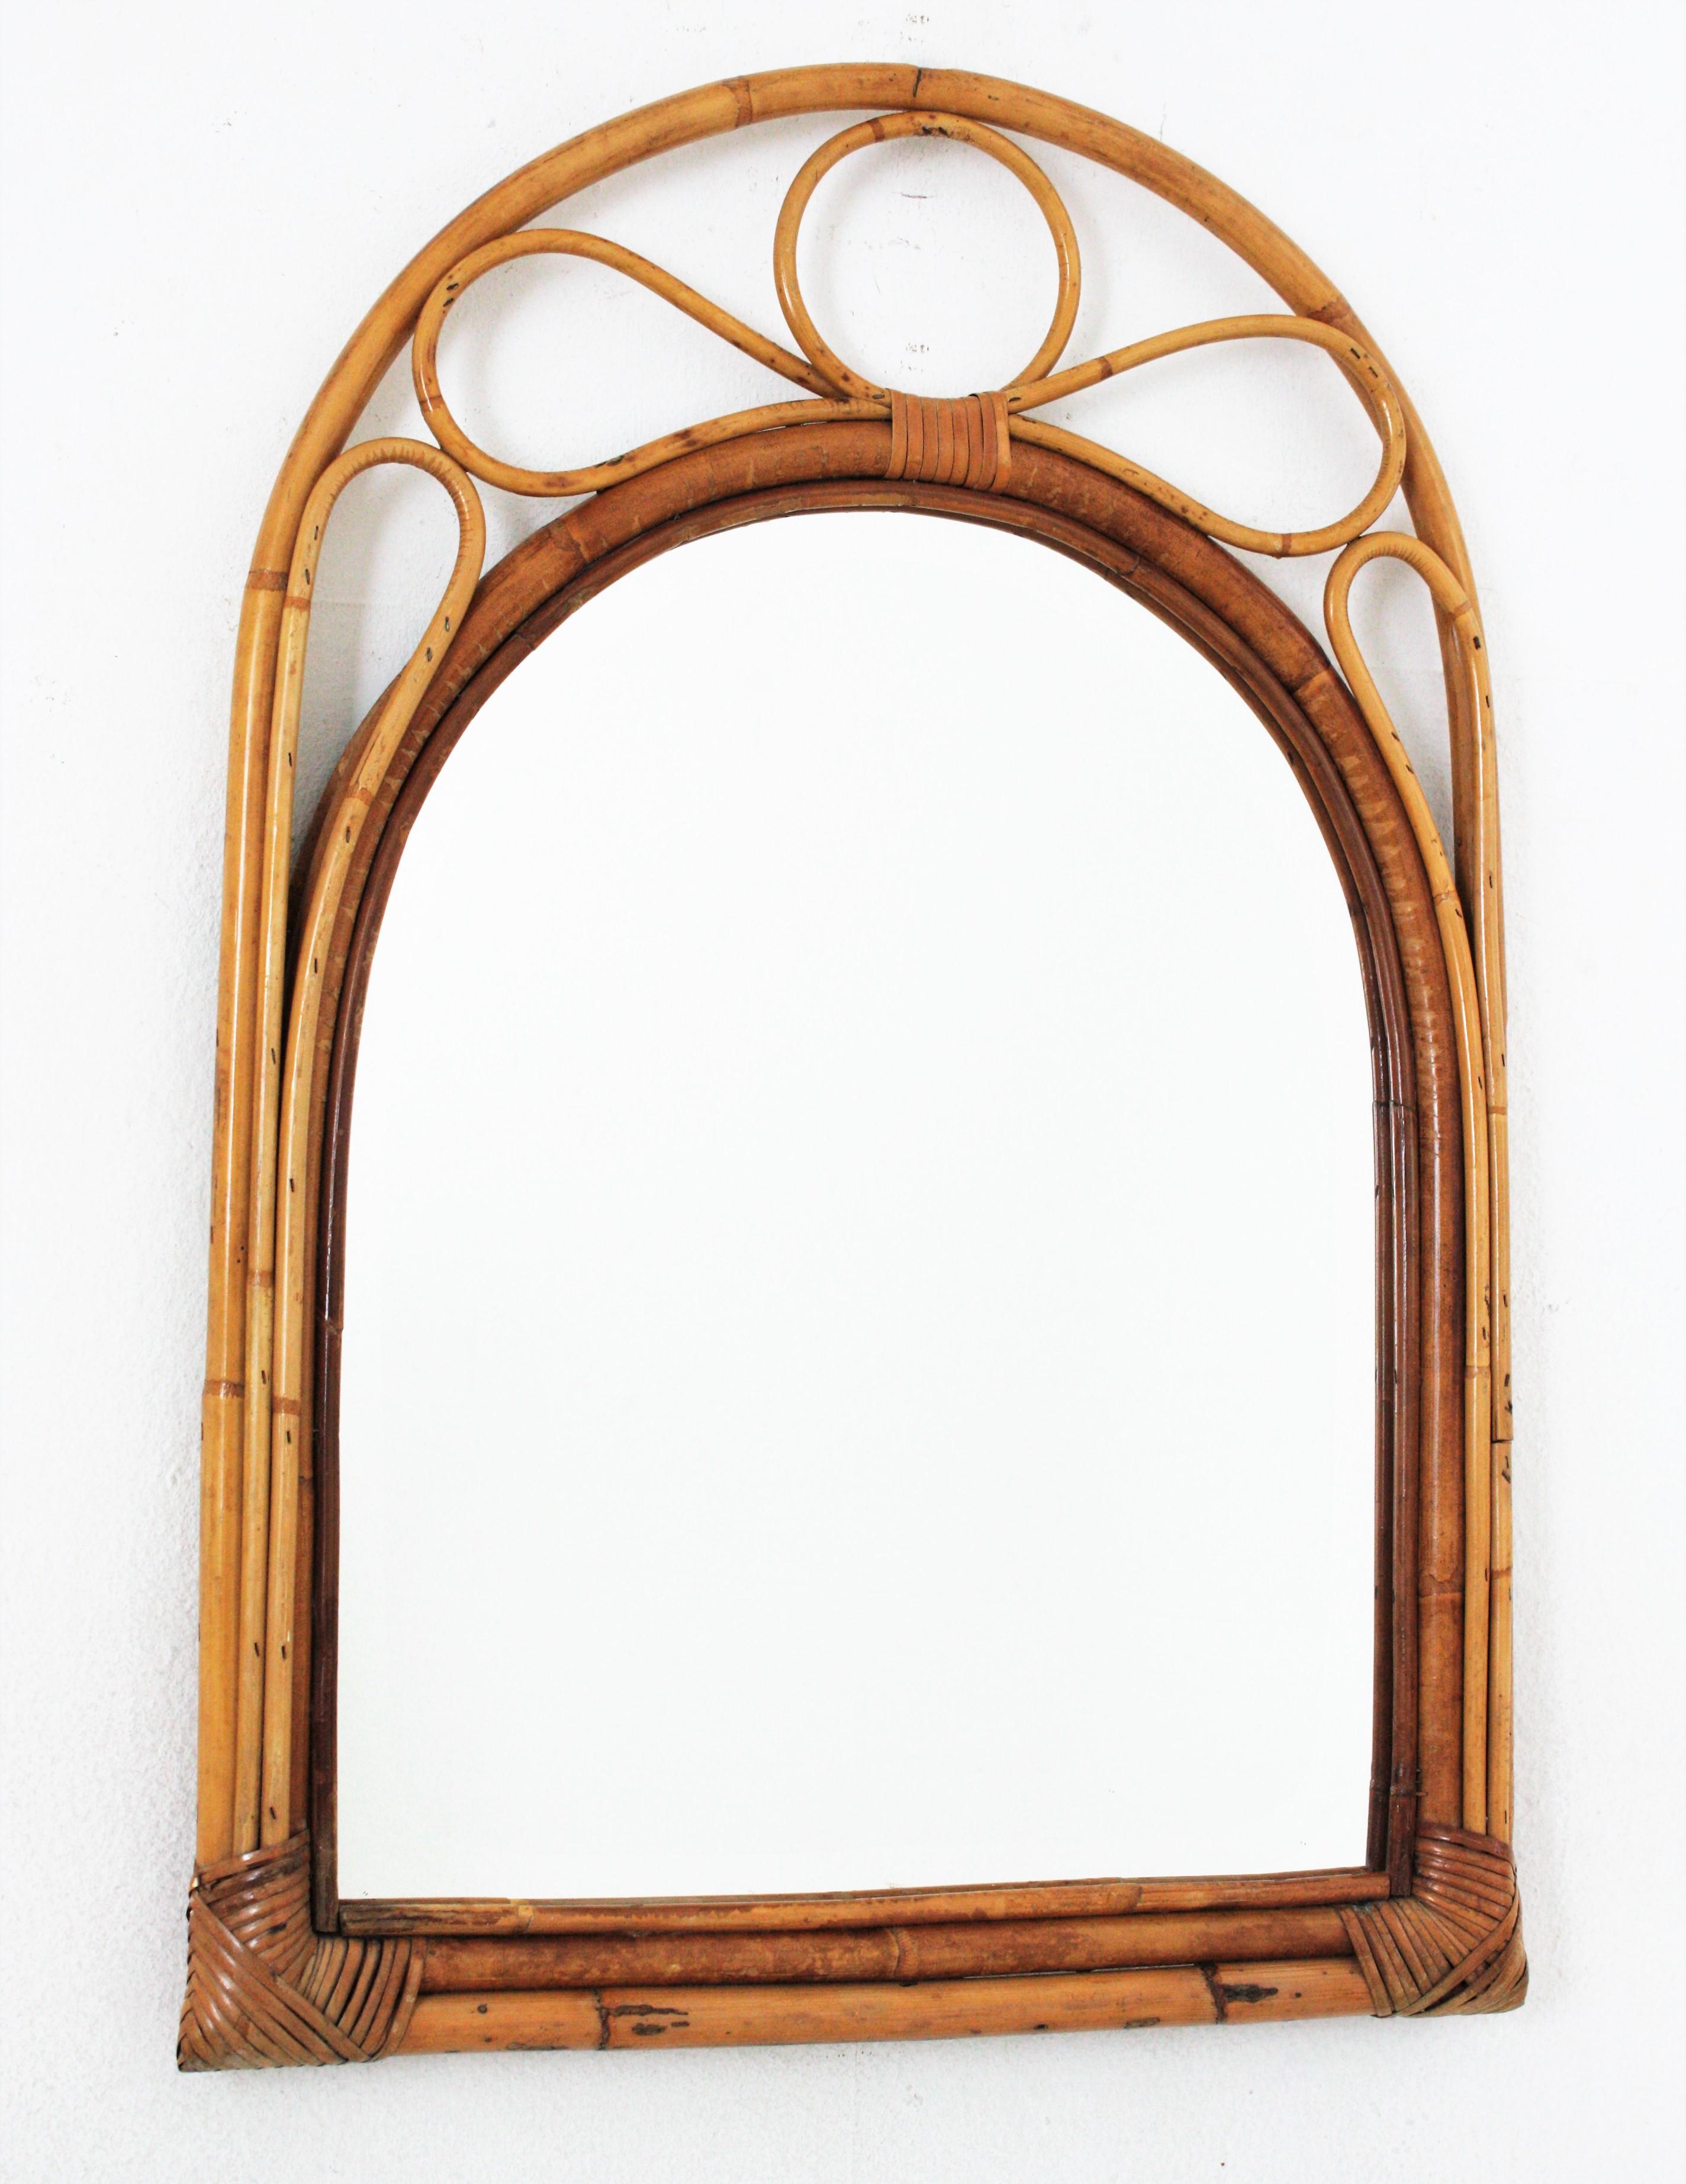 Eye-catching midcentury bamboo and rattan mirror with arched top. Spain, 1960s
This beautiful mirror was handcrafted with bamboo cane and rattan combining midcentury and oriental accents.
It will be a nice addition to be used in a bathroom or as